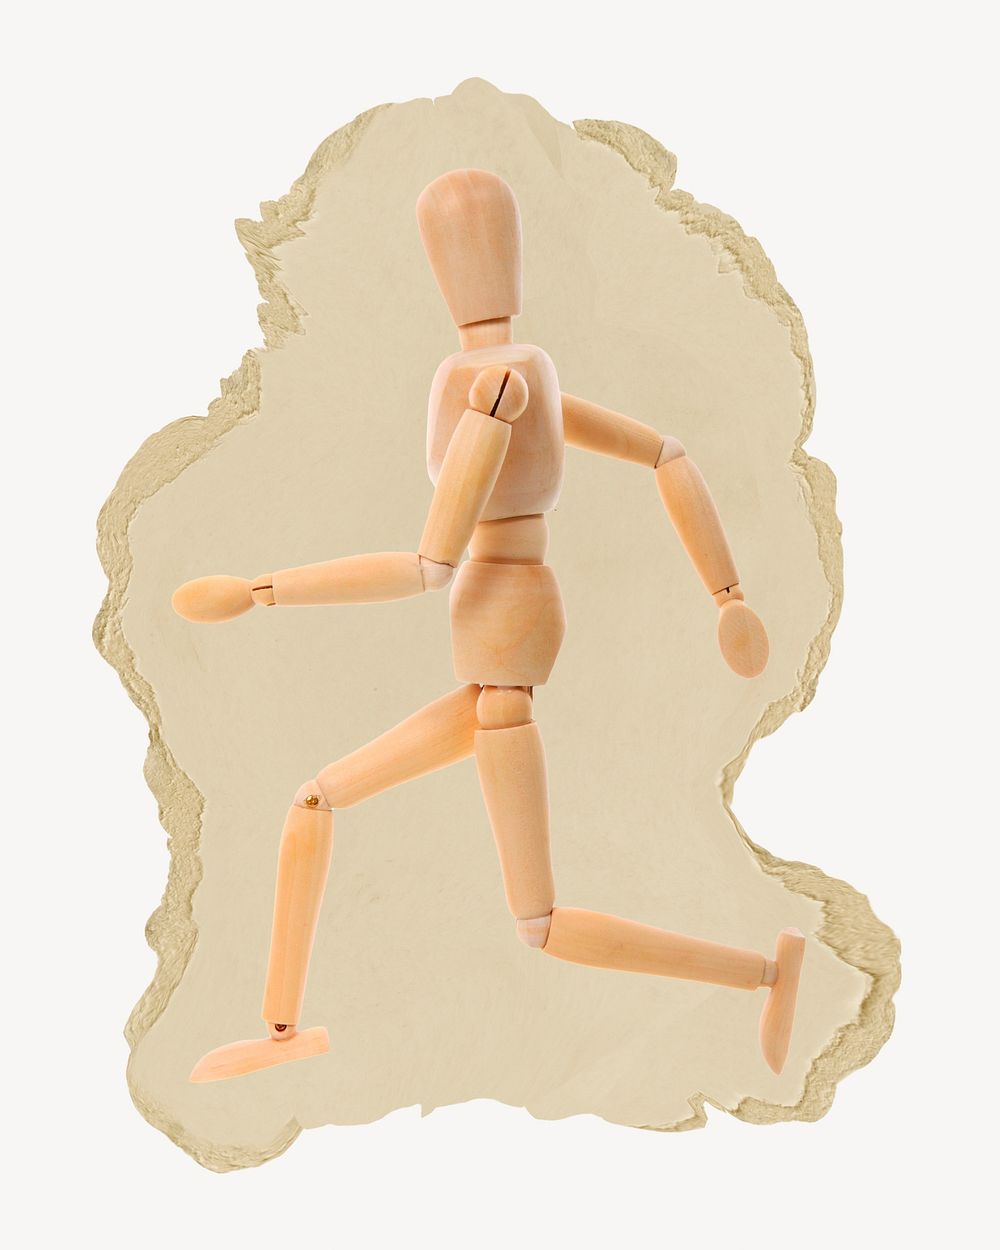 Wooden mannequin, ripped paper collage element